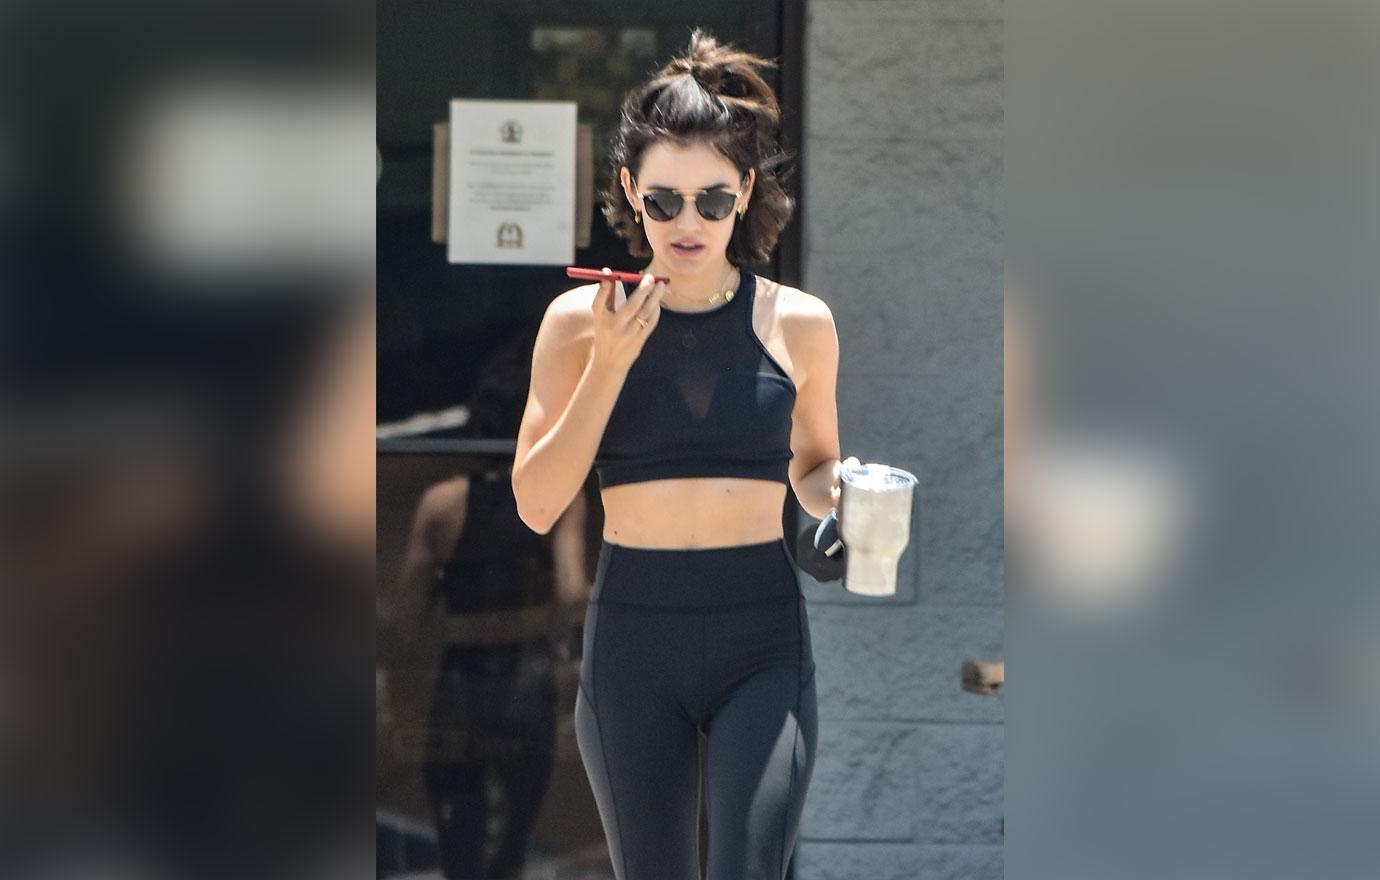 Lucy Hale sports a brown sports bra and leggings for a hot yoga